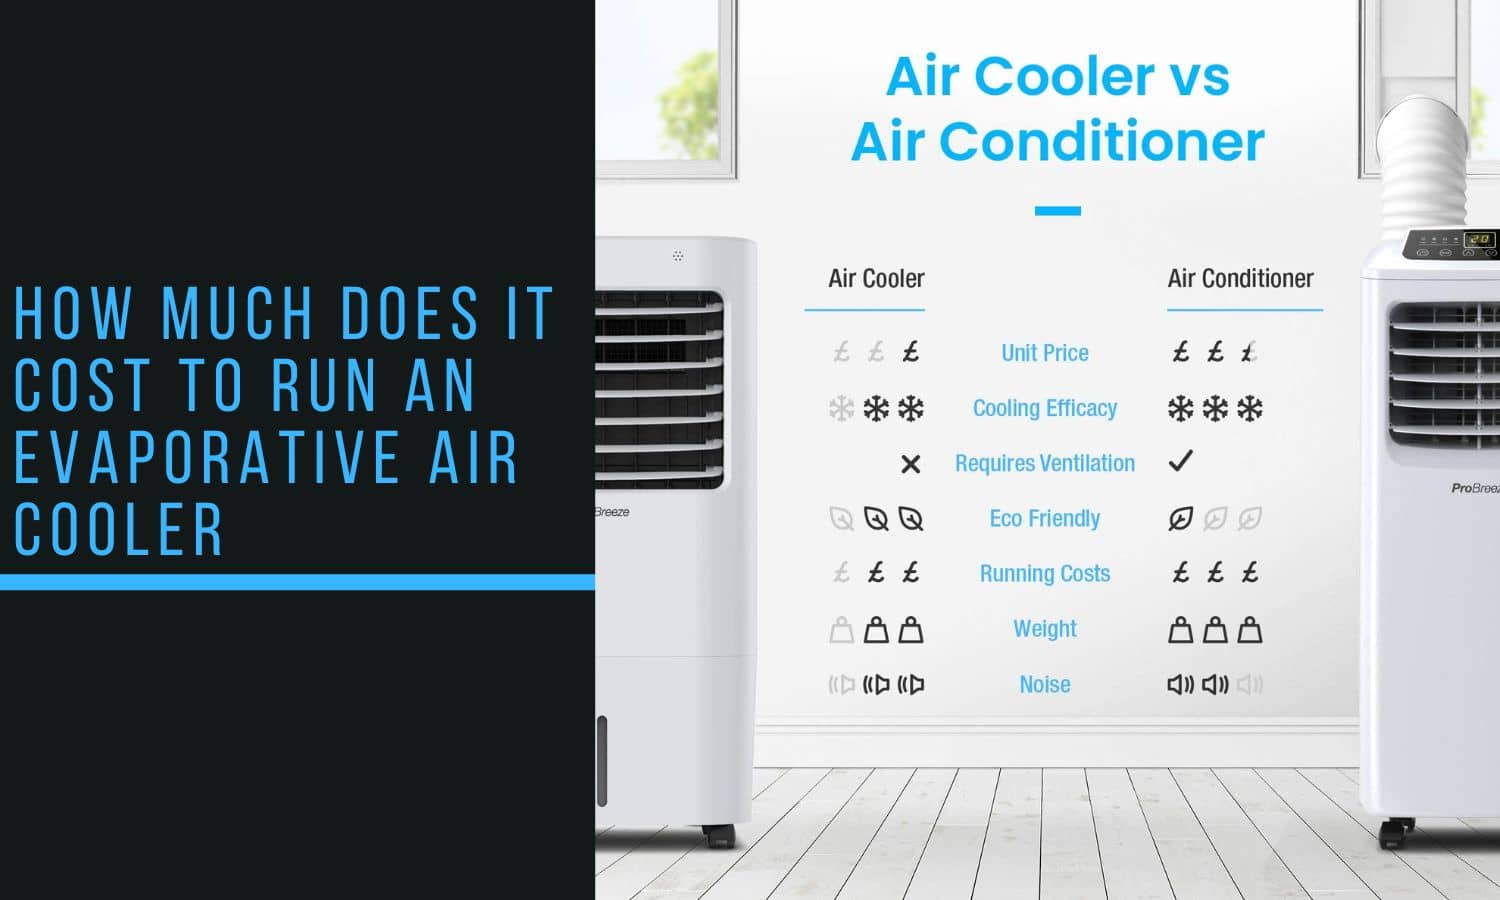 How much does it cost to run an evaporative air cooler